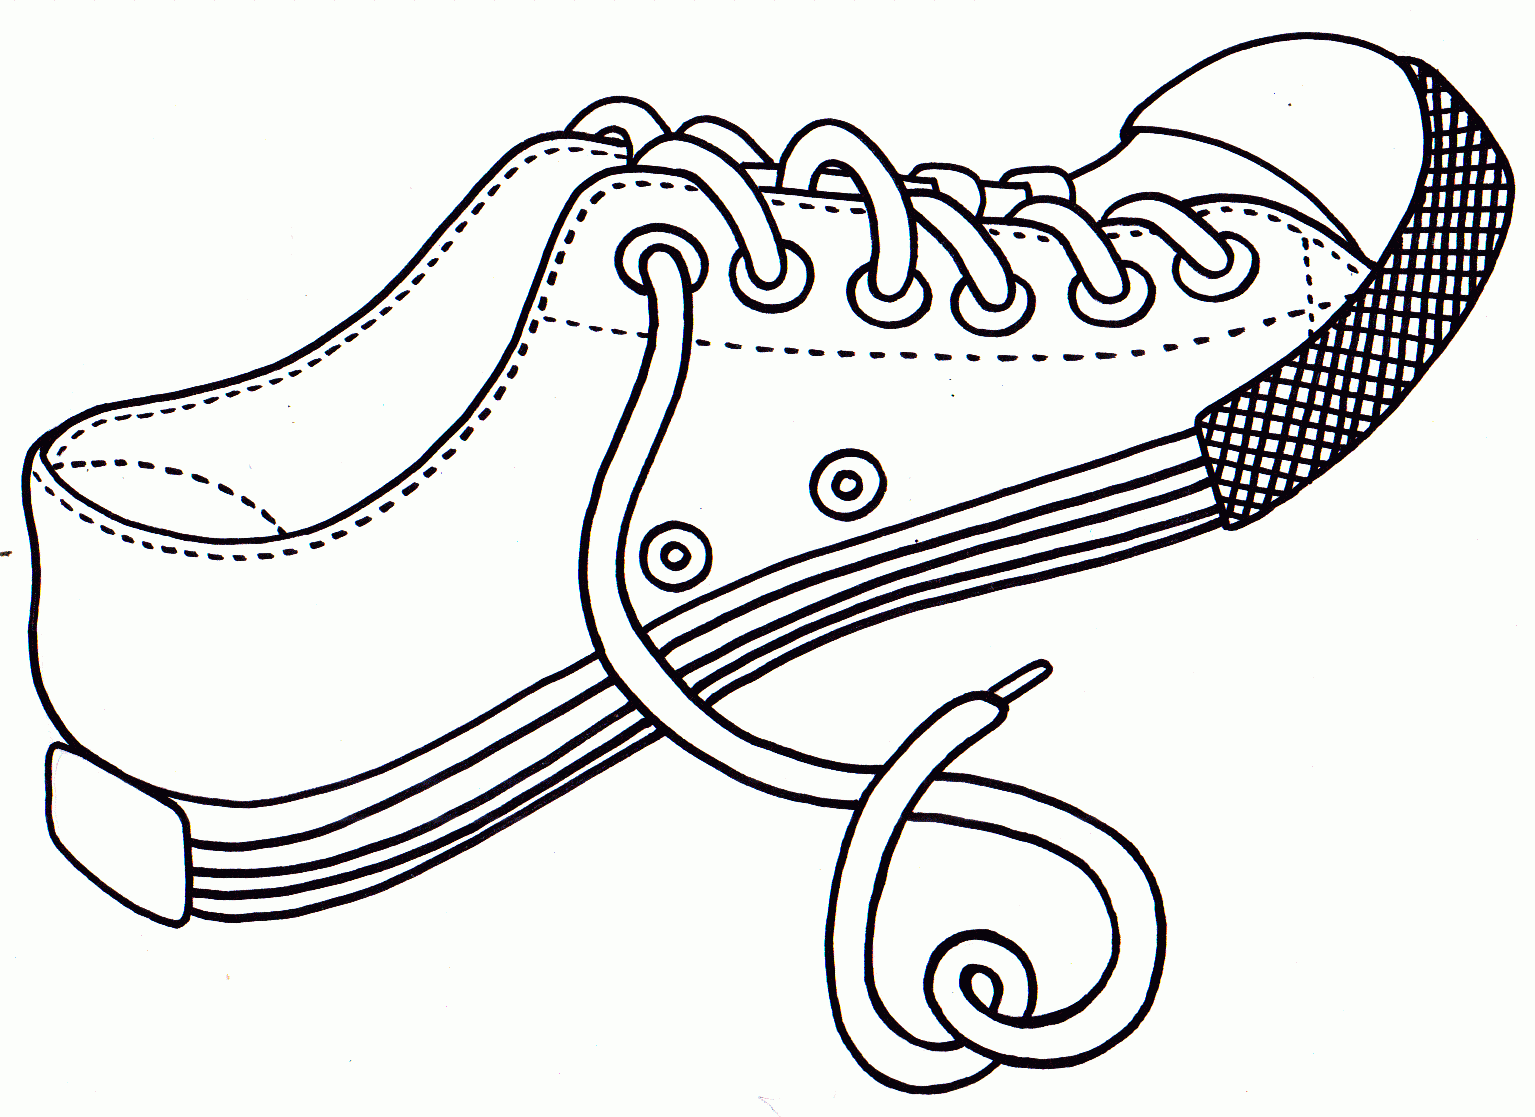 Coloring Pages Shoes Printable - High Quality Coloring Pages